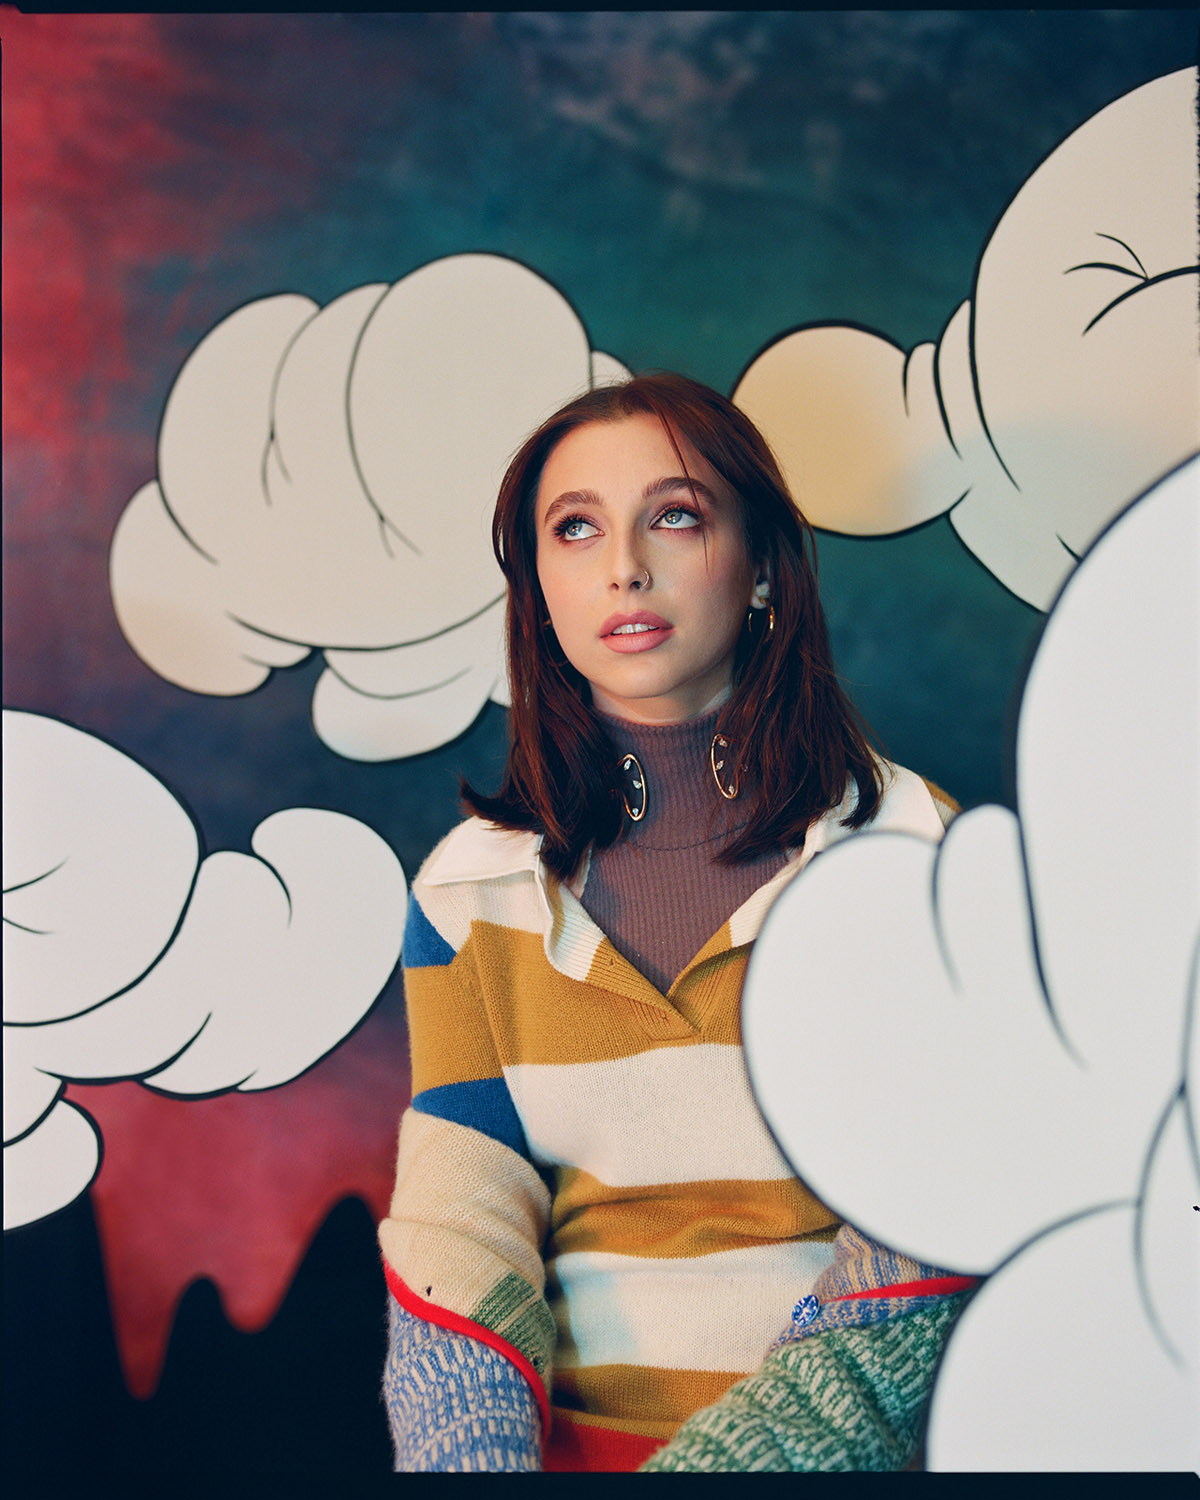 She's worth the wait 😉—@emmachamberlain is our latest digital cover star!  ✨ When it comes to content creators, you either love them or…